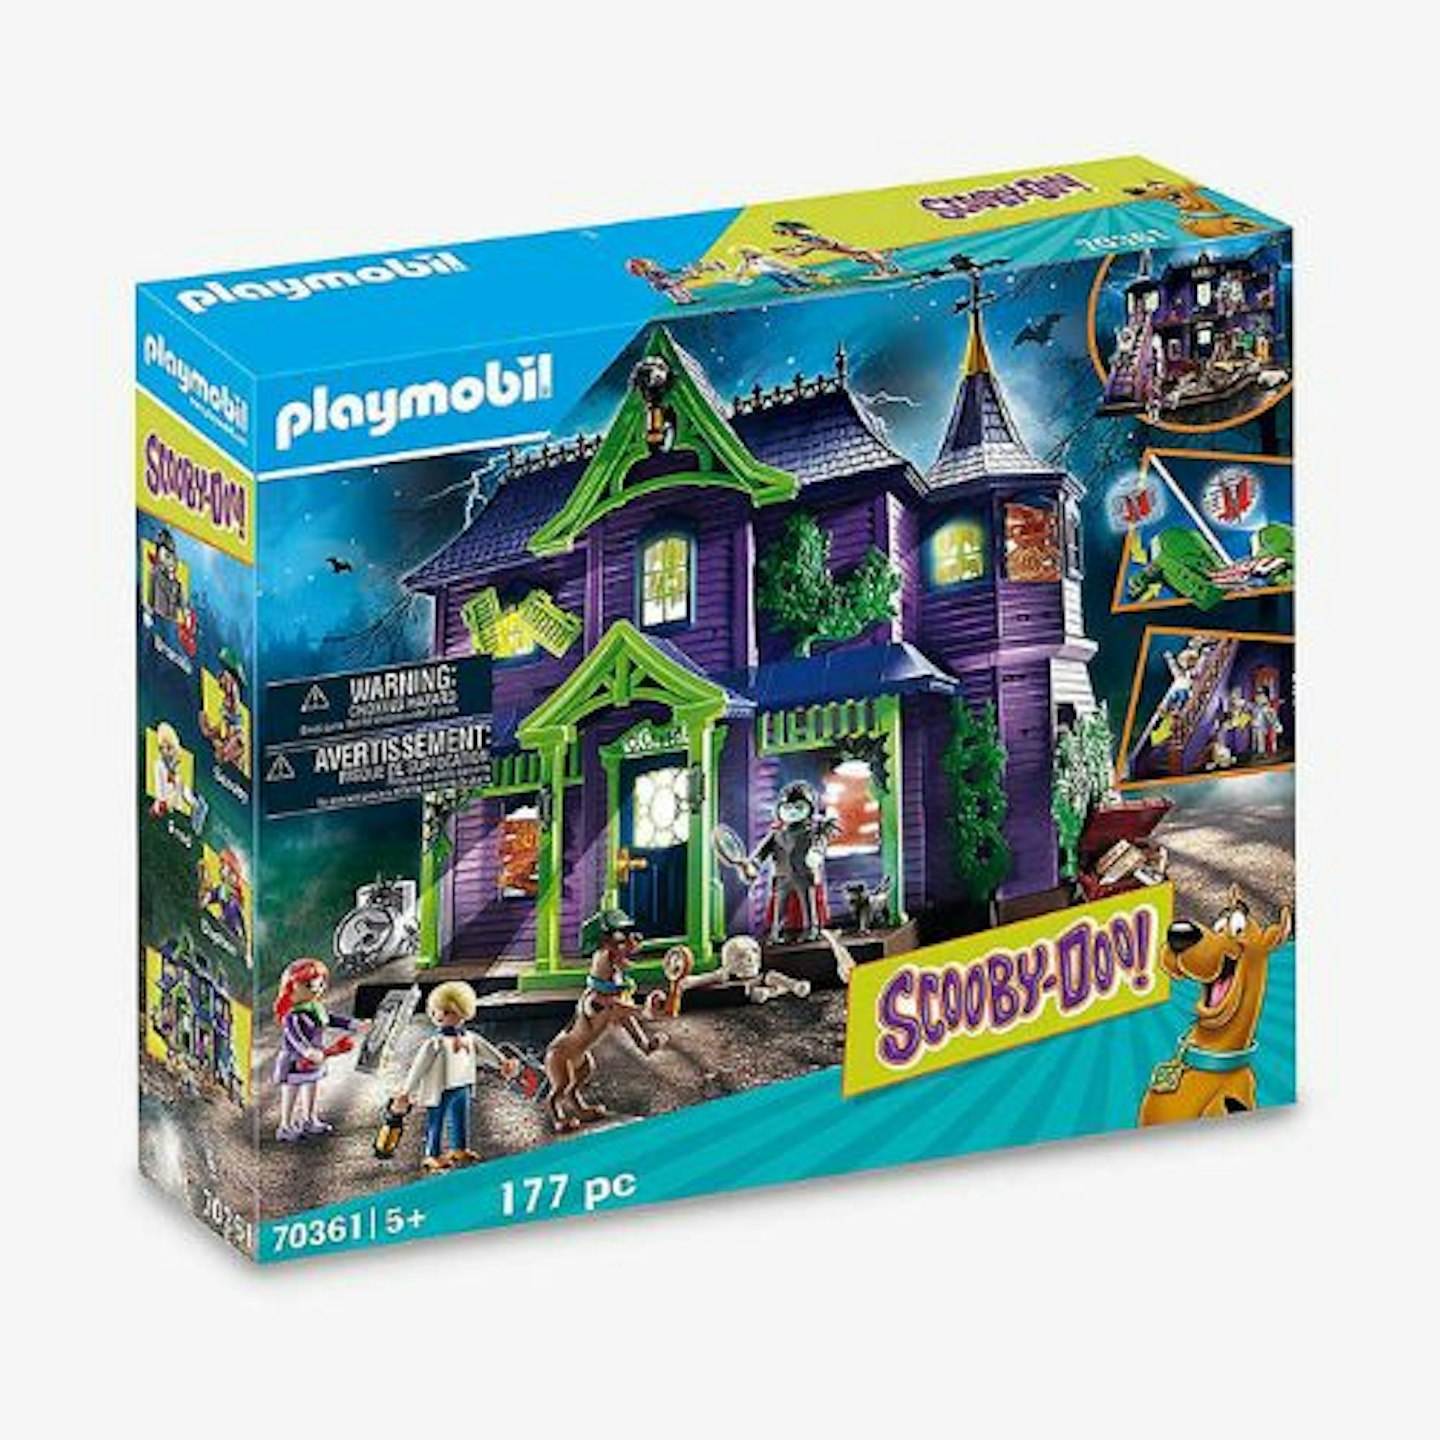 Playmobil Scooby Doo! 70361 Mystery Mansion Playset